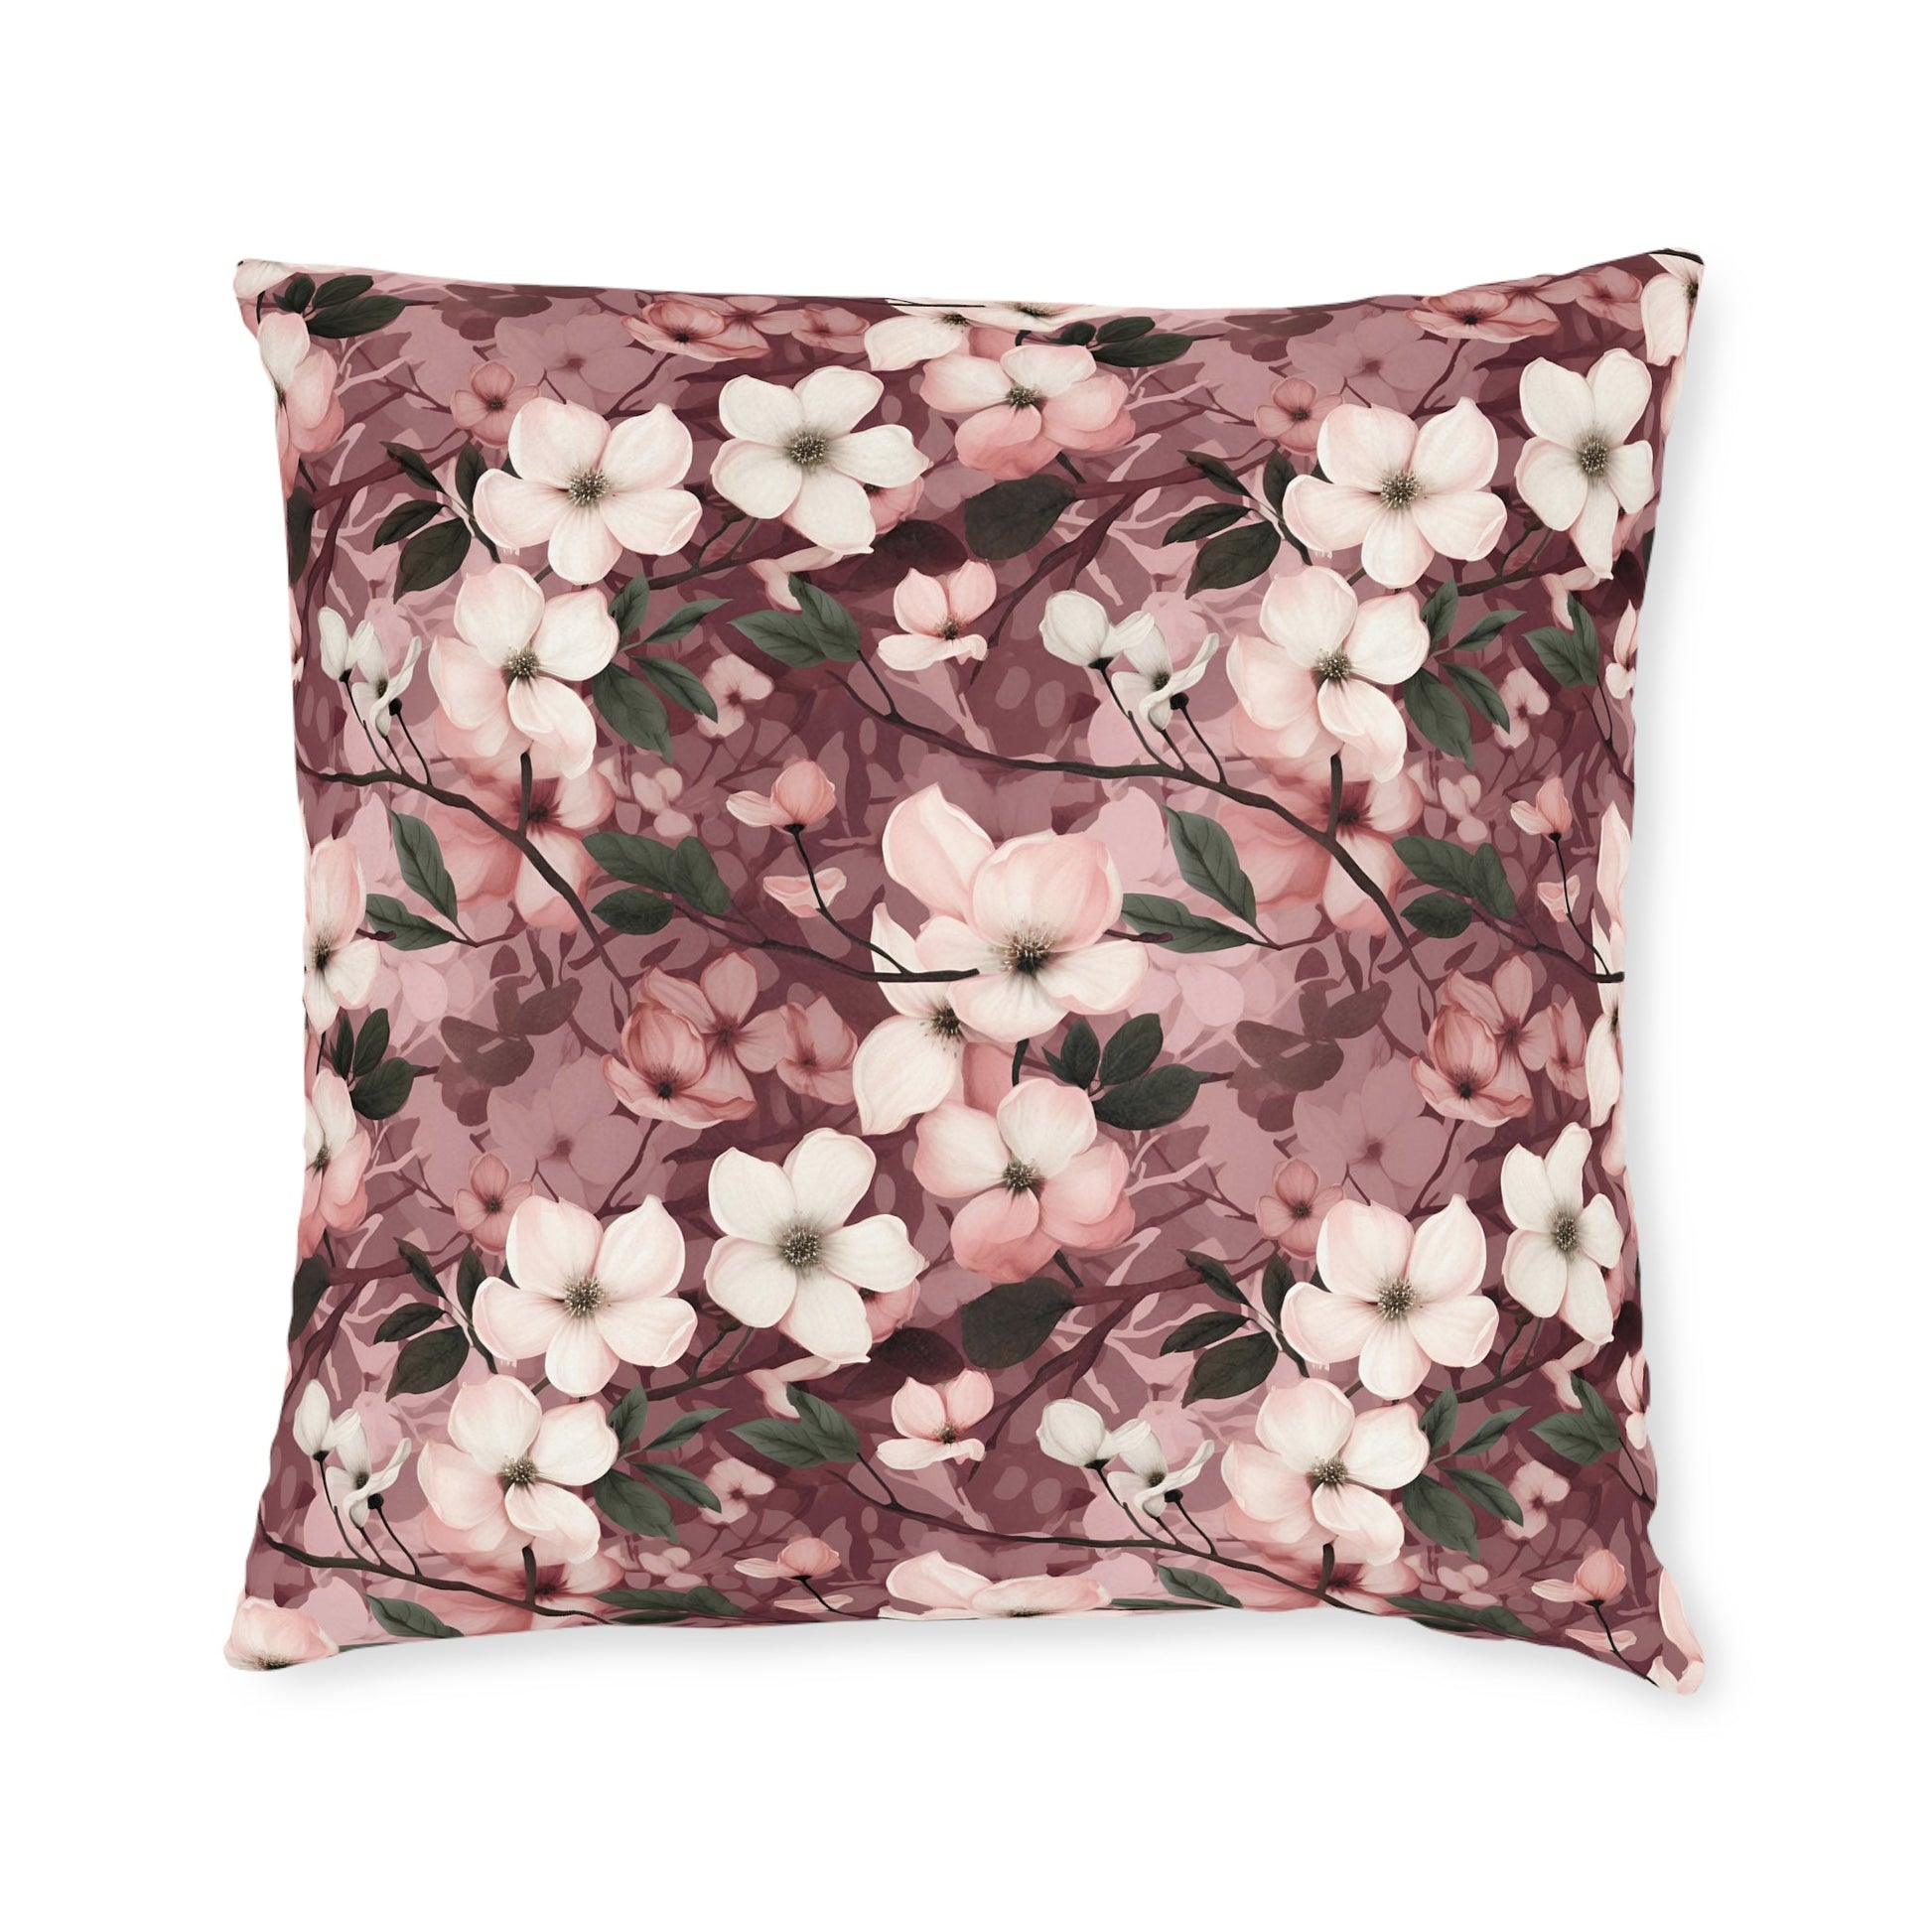 Sparse Dogwood Blossoms - Elegant Floral Design Sofa and Chair Cushion - Pattern Symphony